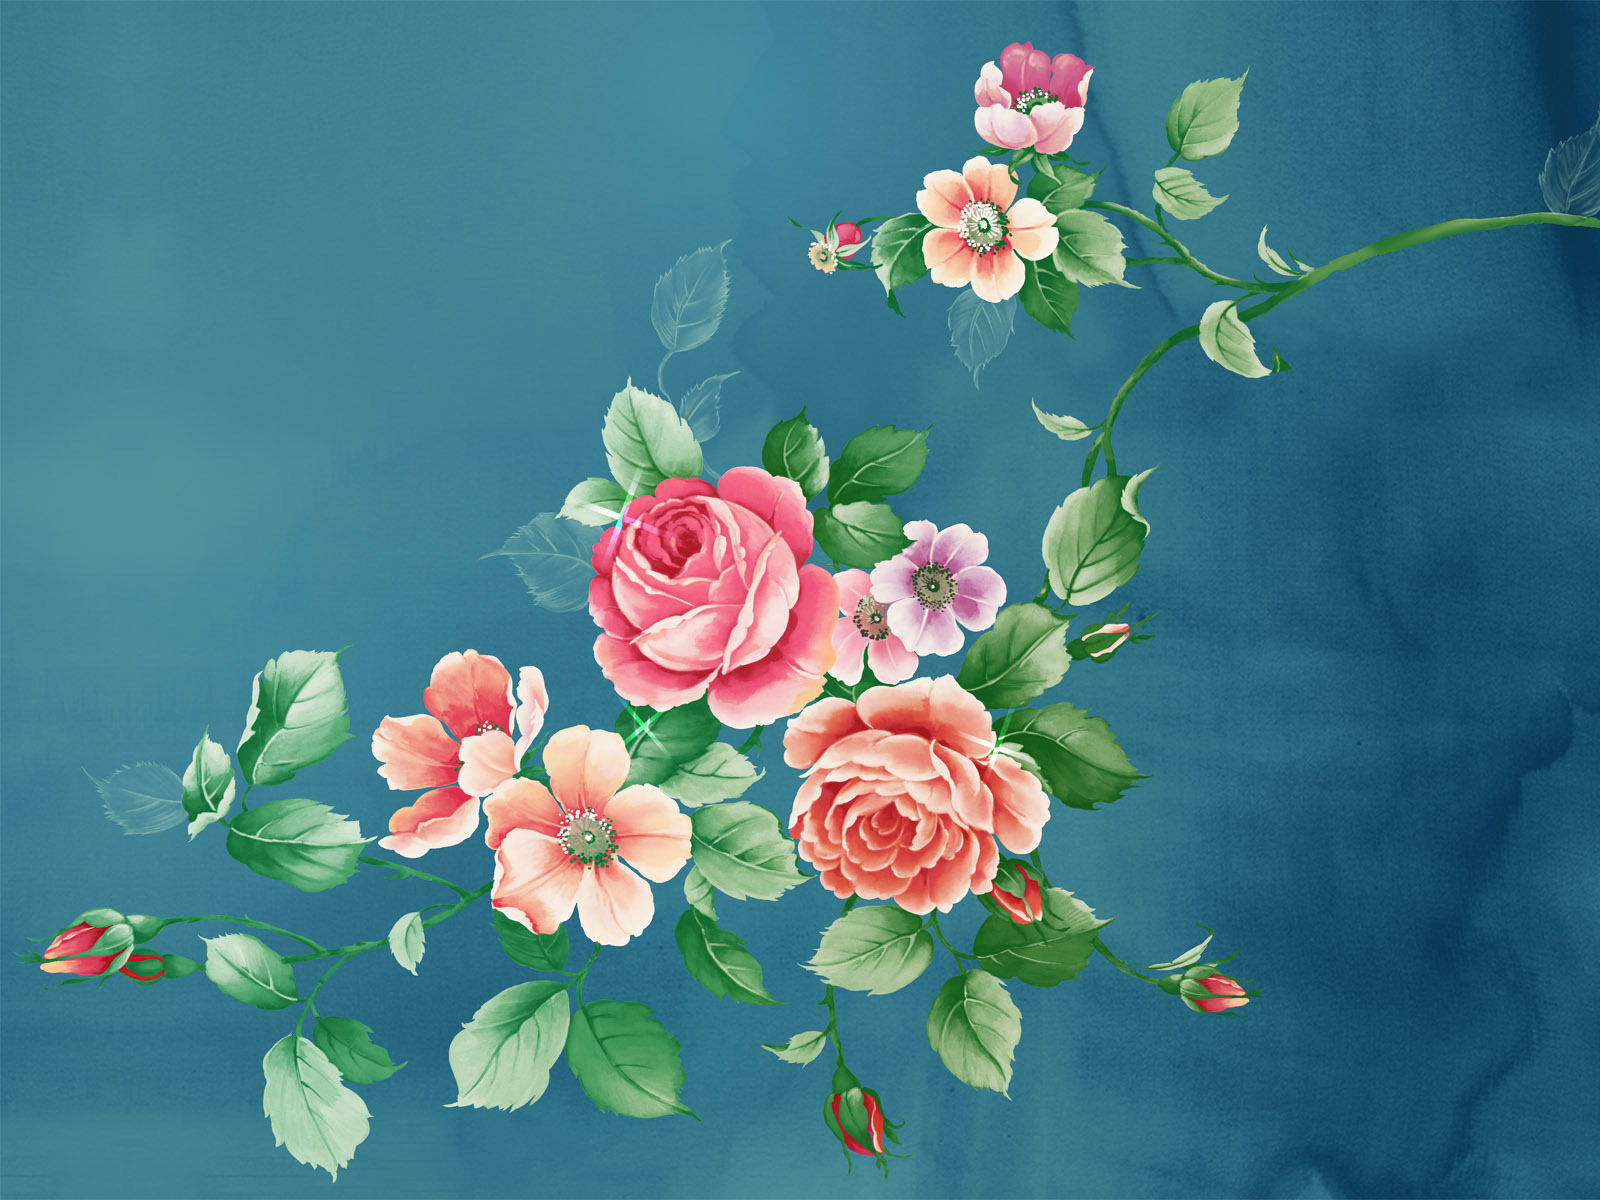 roses, plants, pictures, flowers, turquoise lock screen backgrounds